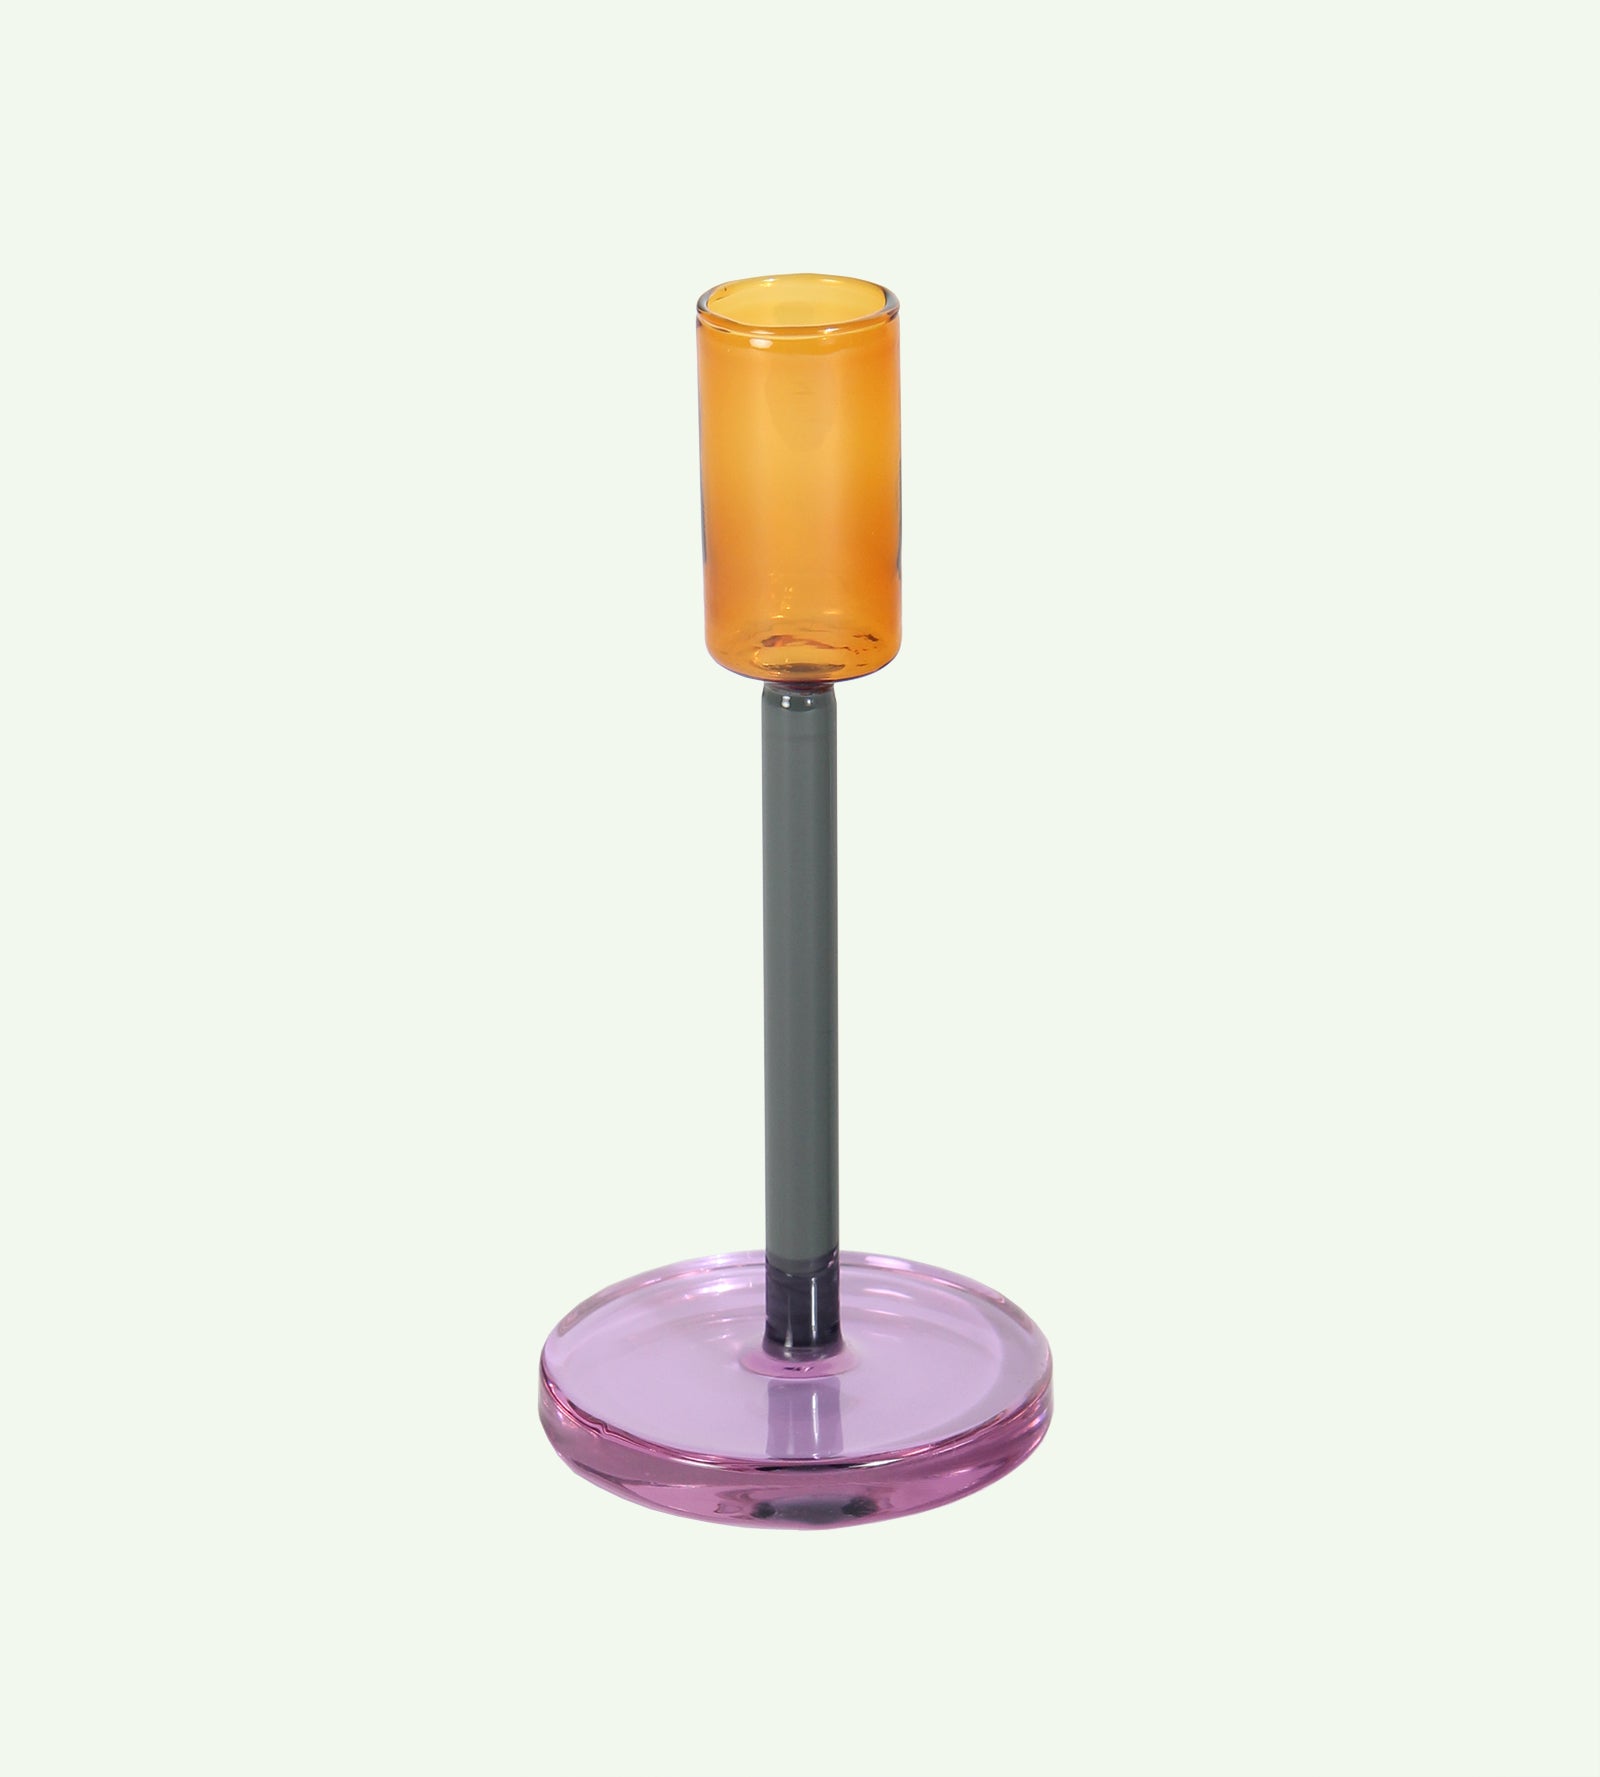 Glass Candlestick Holder in Yellow, Grey, and Purple